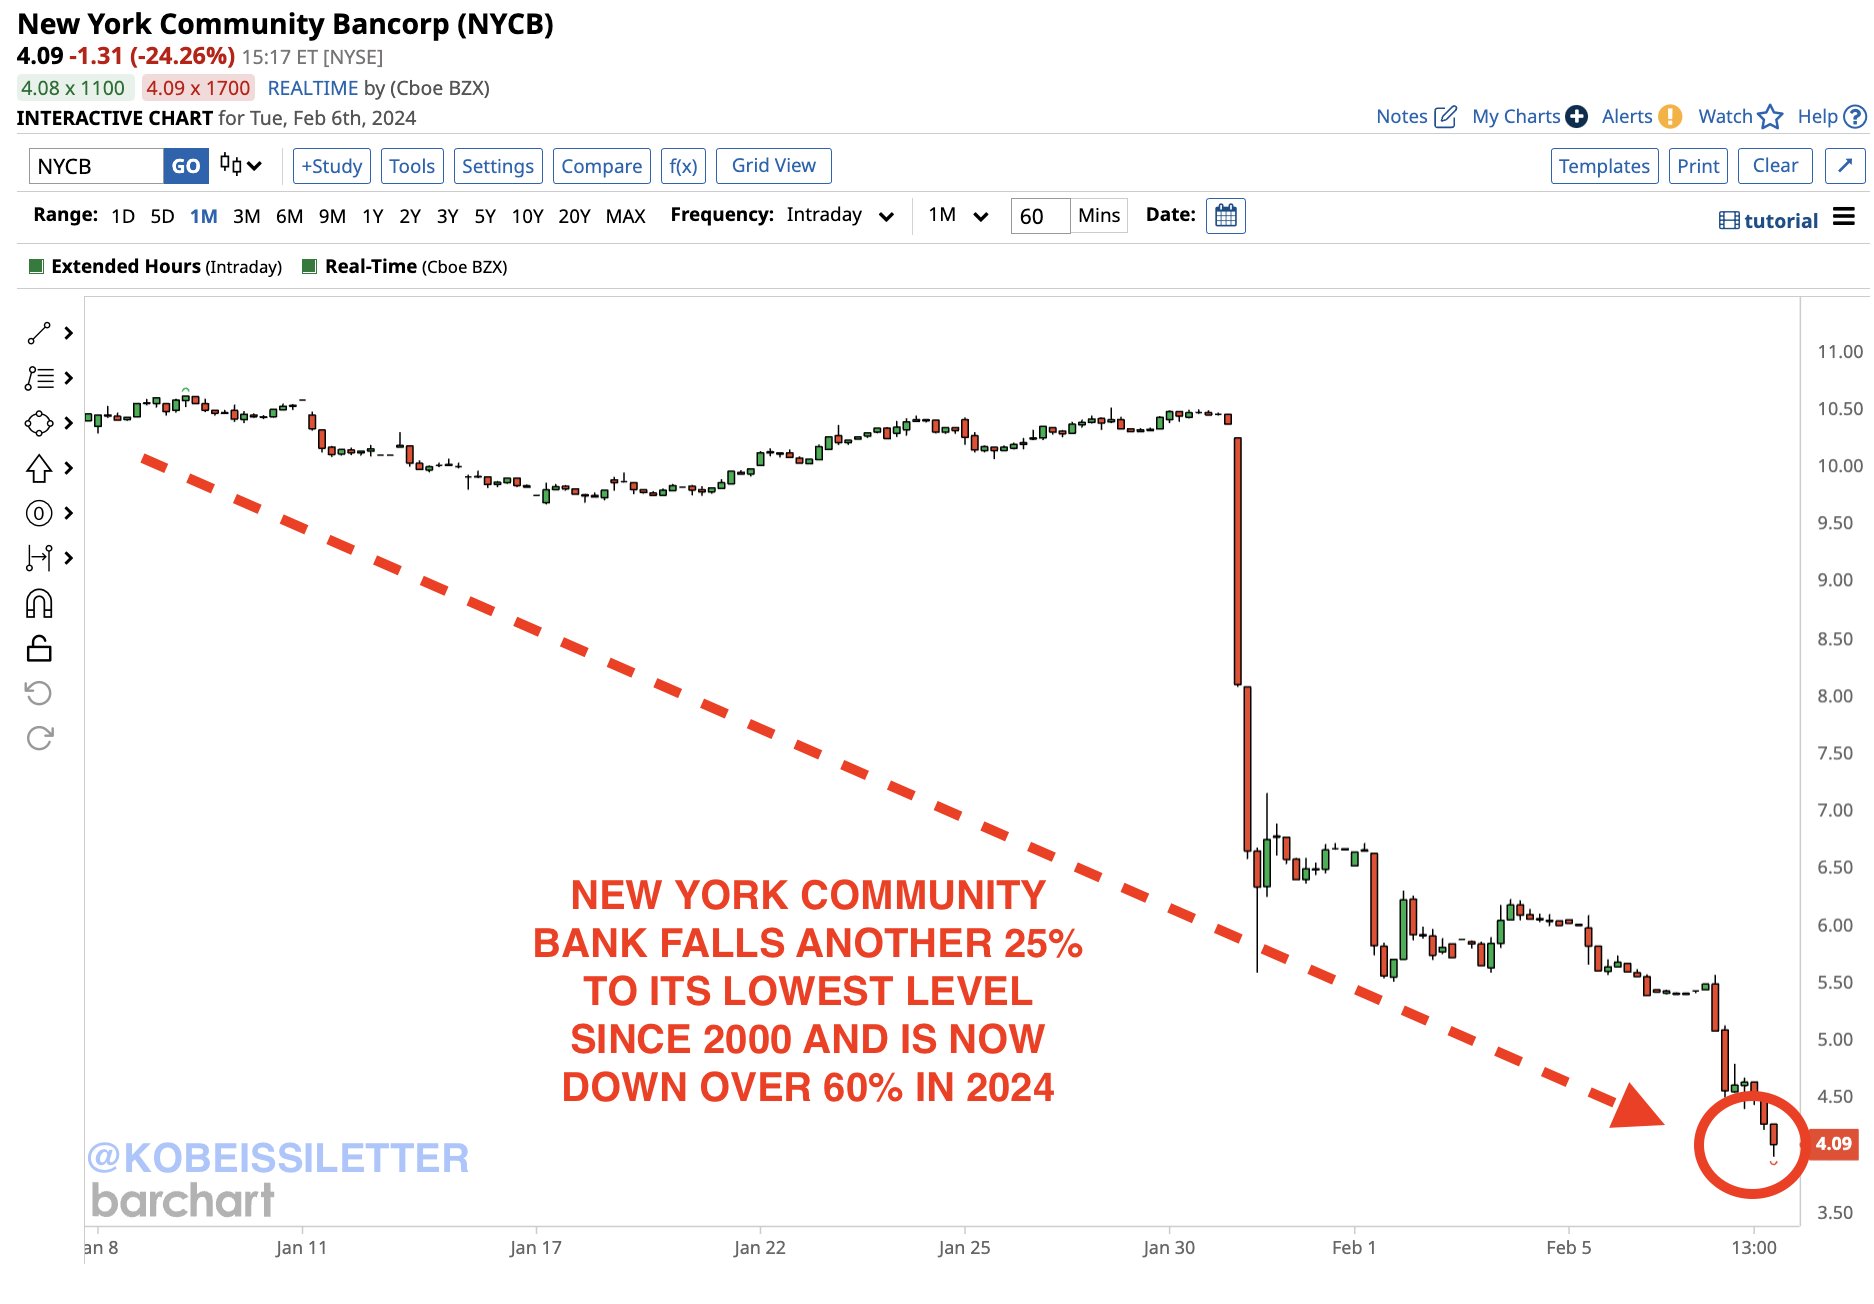 NYCB stock plunge. Source: X/@KobeissiLetter